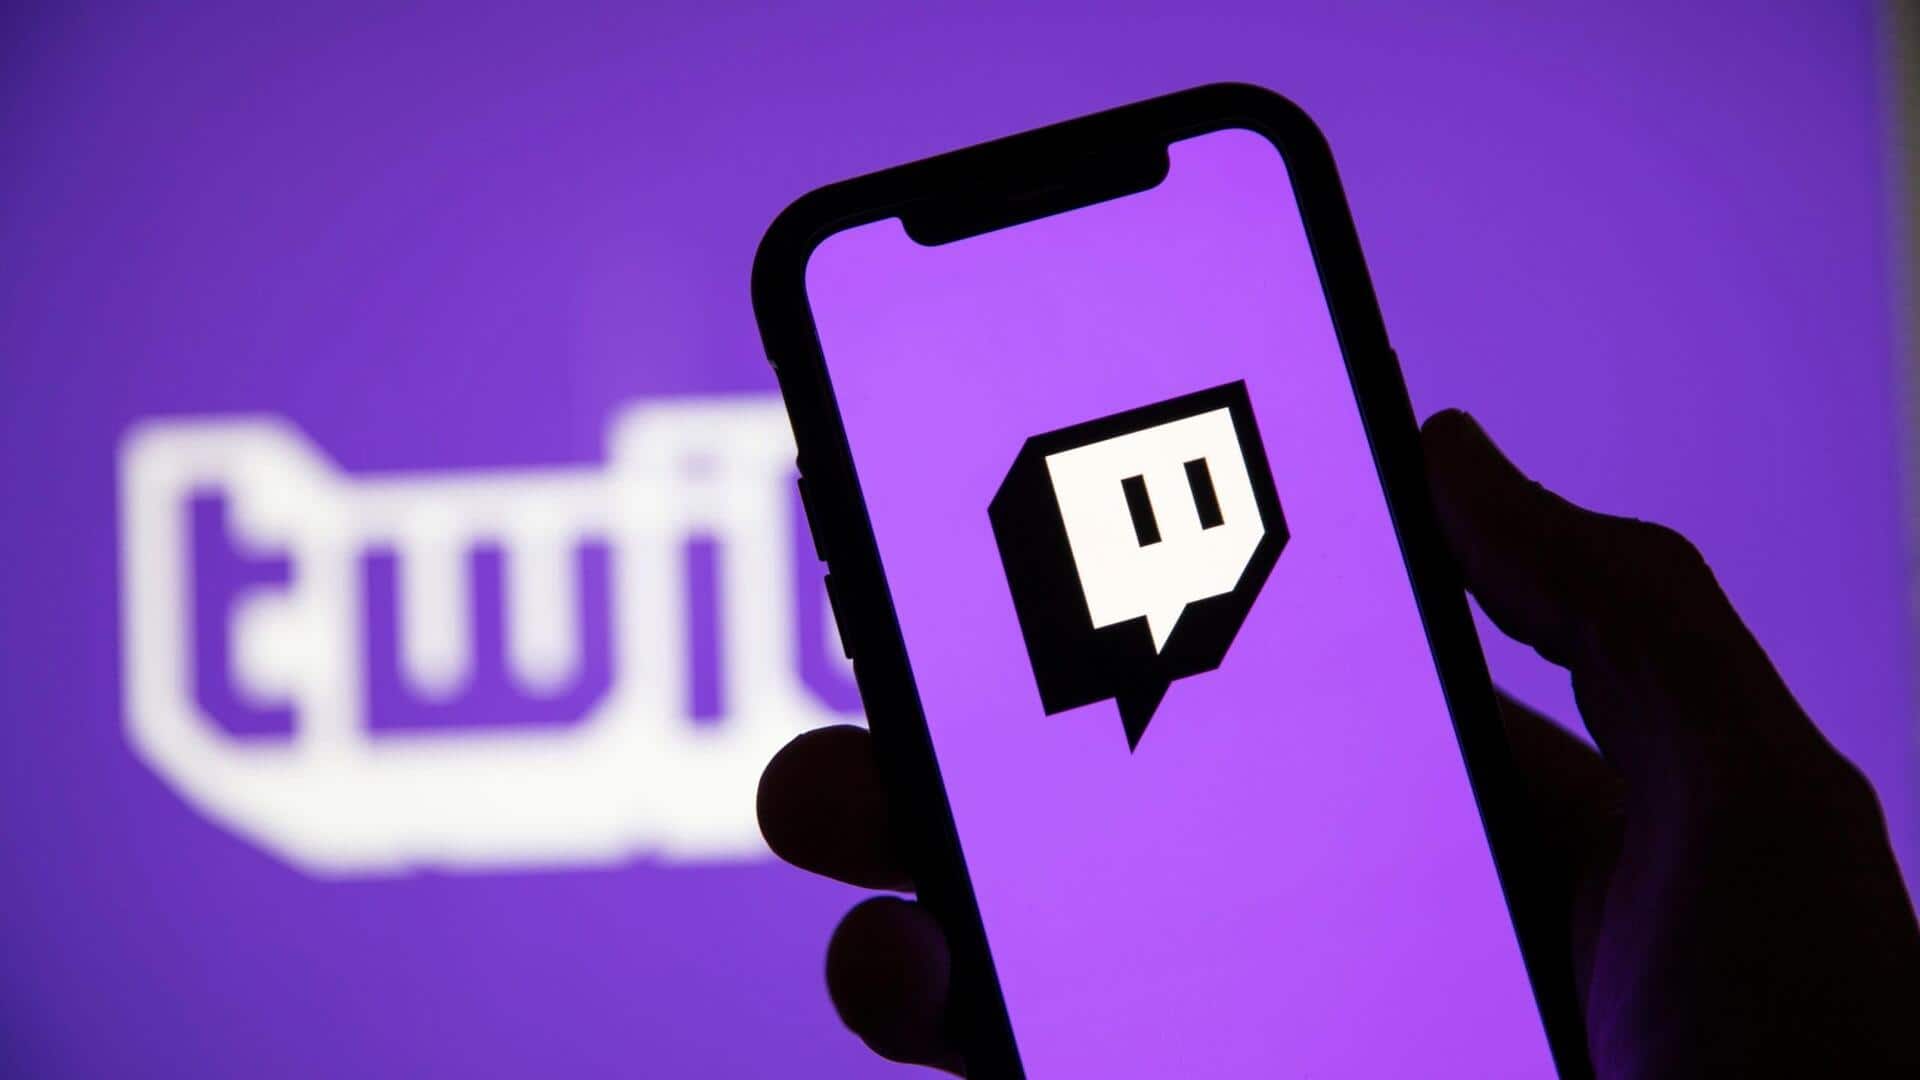 Twitch to introduce TikTok-inspired discovery feed within its mobile app